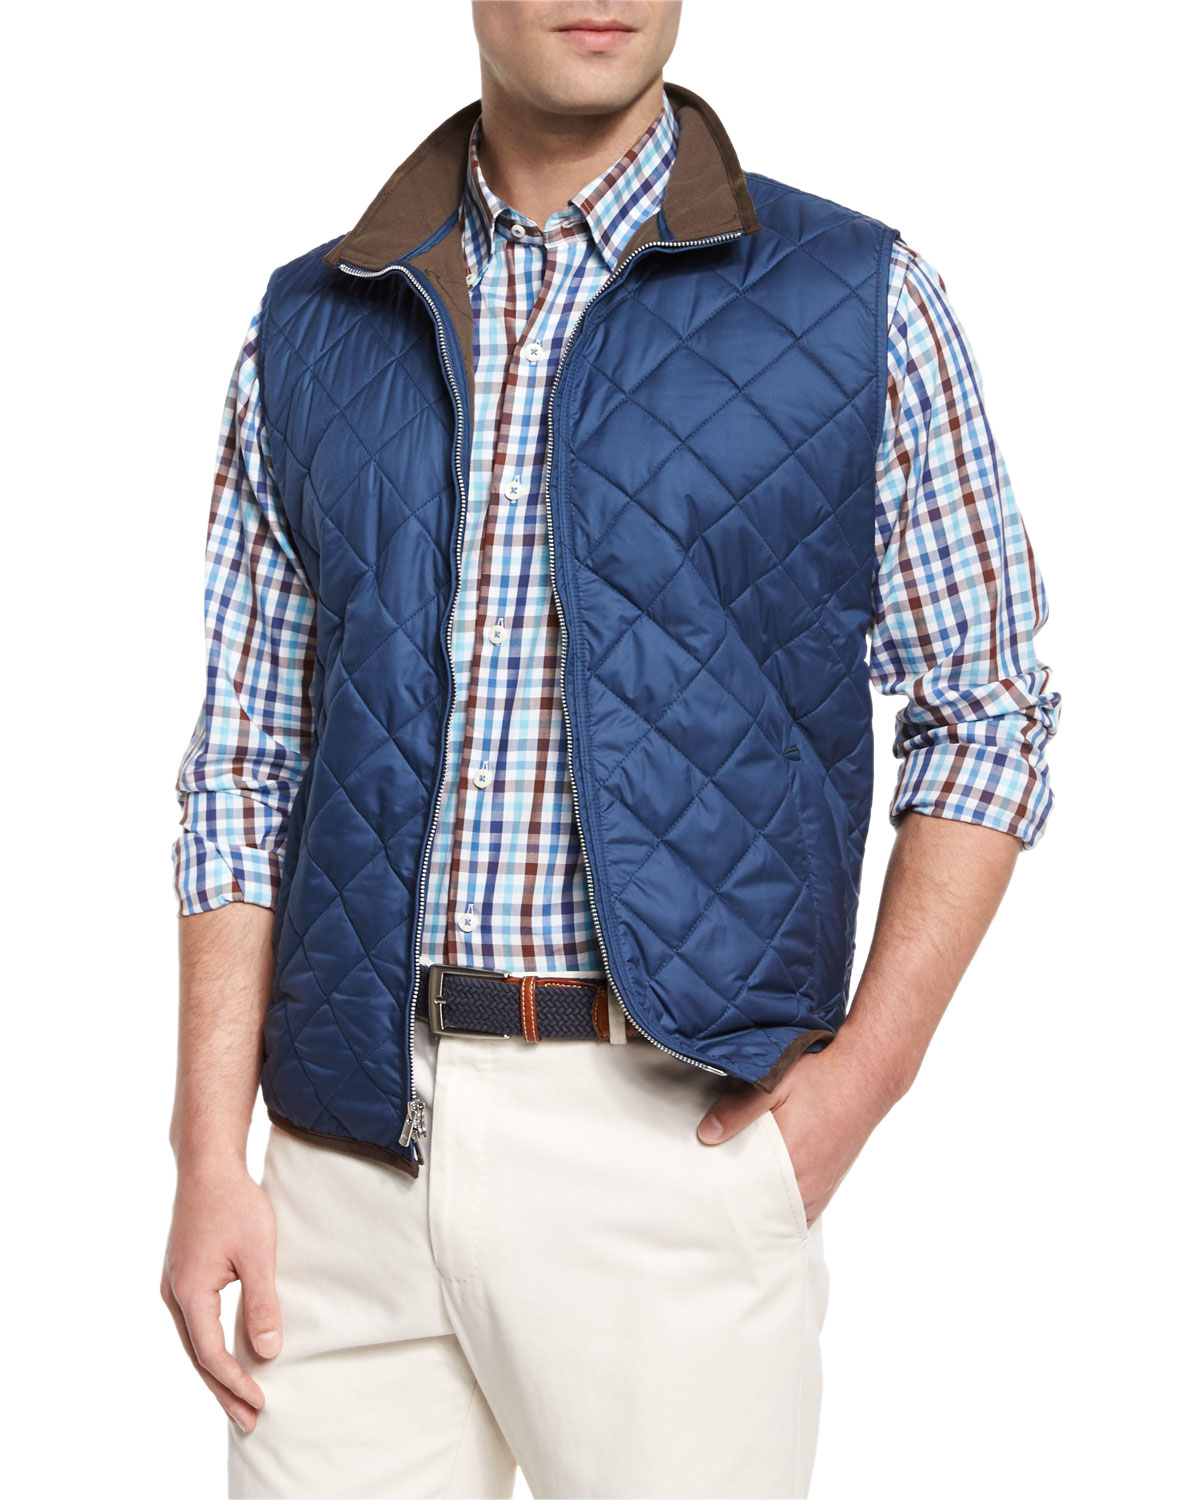 Lyst - Peter Millar Potomac Quilted Vest in Blue for Men